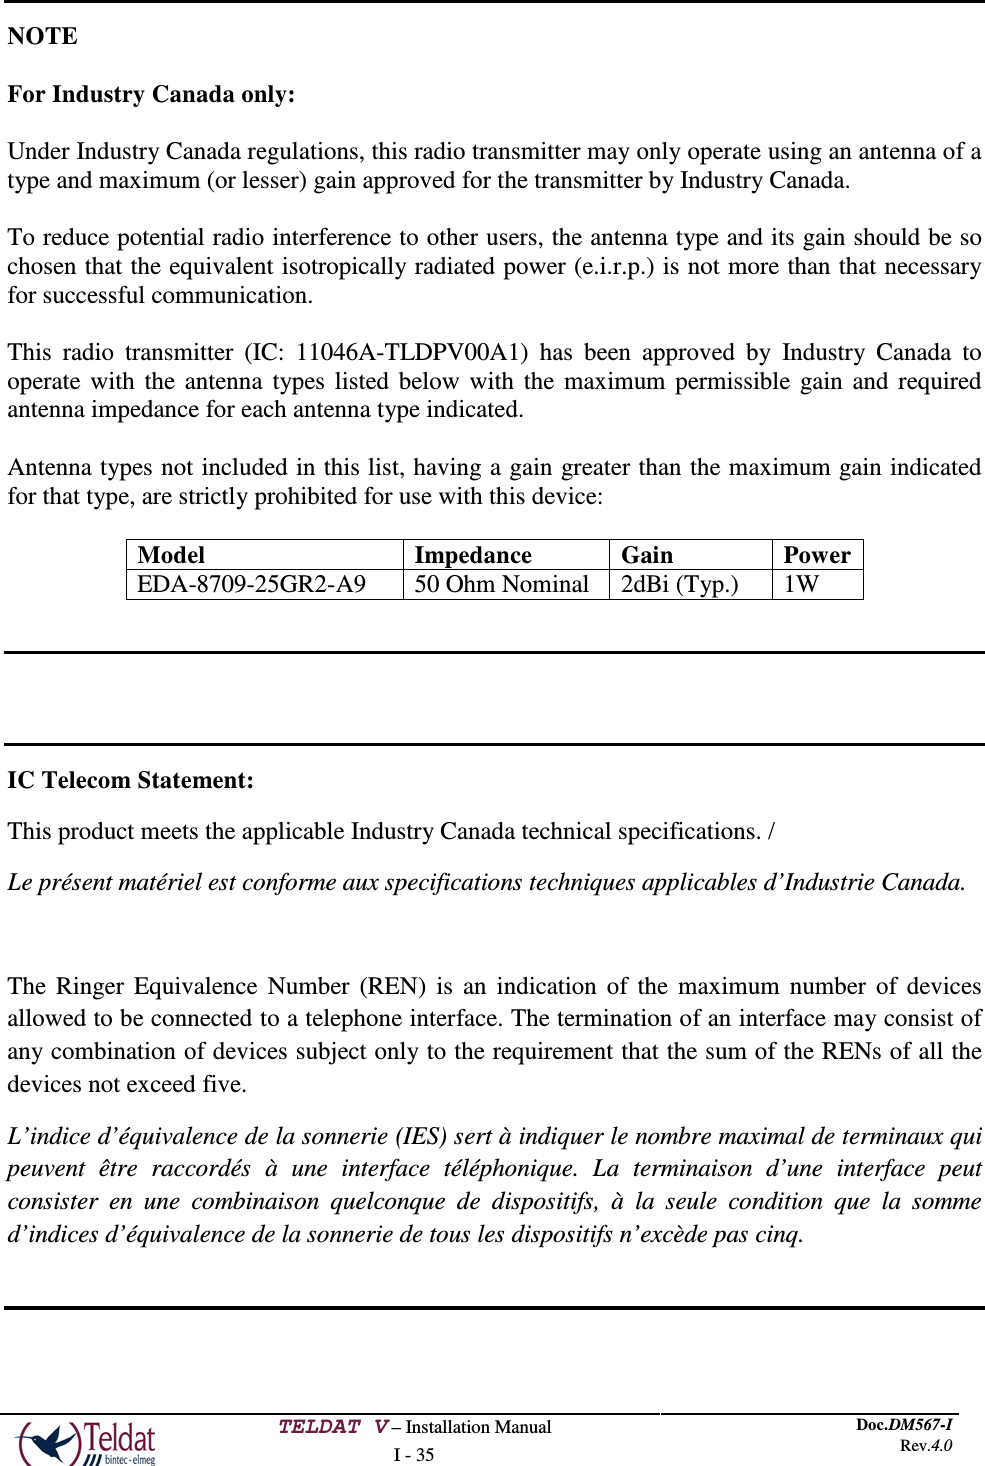  TELDAT V – Installation Manual I - 35 Doc.DM567-I Rev.4.0   NOTE  For Industry Canada only:  Under Industry Canada regulations, this radio transmitter may only operate using an antenna of a type and maximum (or lesser) gain approved for the transmitter by Industry Canada.  To reduce potential radio interference to other users, the antenna type and its gain should be so chosen that the equivalent isotropically radiated power (e.i.r.p.) is not more than that necessary for successful communication.  This radio transmitter (IC: 11046A-TLDPV00A1) has been approved by Industry Canada to operate with the antenna types listed below with the maximum permissible gain and required antenna impedance for each antenna type indicated.   Antenna types not included in this list, having a gain greater than the maximum gain indicated for that type, are strictly prohibited for use with this device:  Model Impedance Gain Power EDA-8709-25GR2-A9 50 Ohm Nominal 2dBi (Typ.) 1W    IC Telecom Statement: This product meets the applicable Industry Canada technical specifications. / Le présent matériel est conforme aux specifications techniques applicables d’Industrie Canada.  The Ringer Equivalence Number (REN) is an indication of the maximum number of devices allowed to be connected to a telephone interface. The termination of an interface may consist of any combination of devices subject only to the requirement that the sum of the RENs of all the devices not exceed five.  L’indice d’équivalence de la sonnerie (IES) sert à indiquer le nombre maximal de terminaux qui peuvent être raccordés à une interface téléphonique. La terminaison d’une interface peut consister en une combinaison quelconque de dispositifs, à la seule condition que la somme d’indices d’équivalence de la sonnerie de tous les dispositifs n’excède pas cinq.   